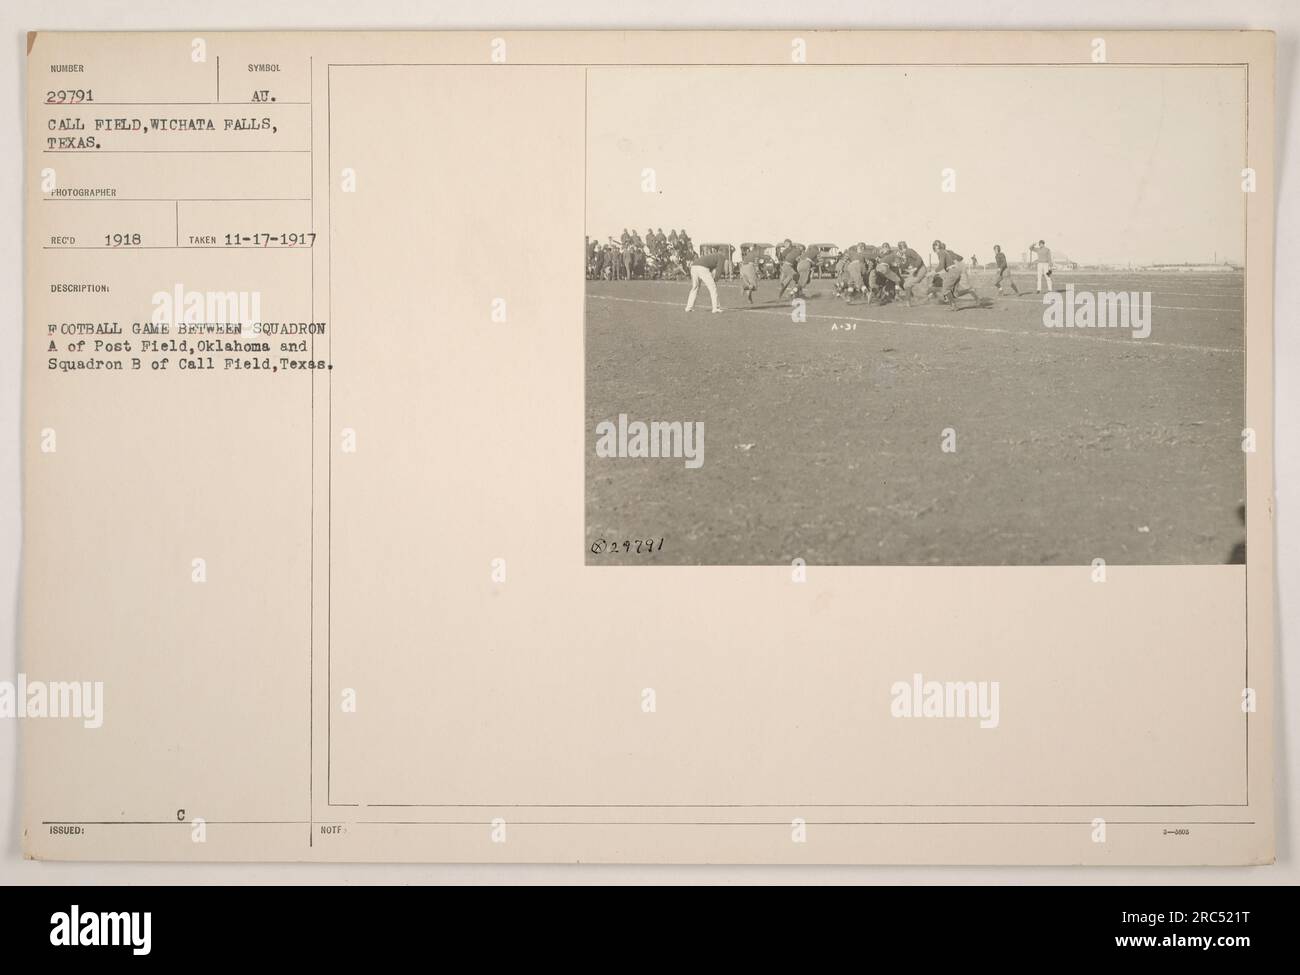 Caption: Squadron A from Post Field, Oklahoma competes against Squadron B from Call Field, Texas in a football game at Call Field, Wichita Falls, Texas on November 17, 1917. This photograph, taken by an unidentified NU photographer, captures a moment during the game. Image ID: 111-SC-29791. Stock Photo